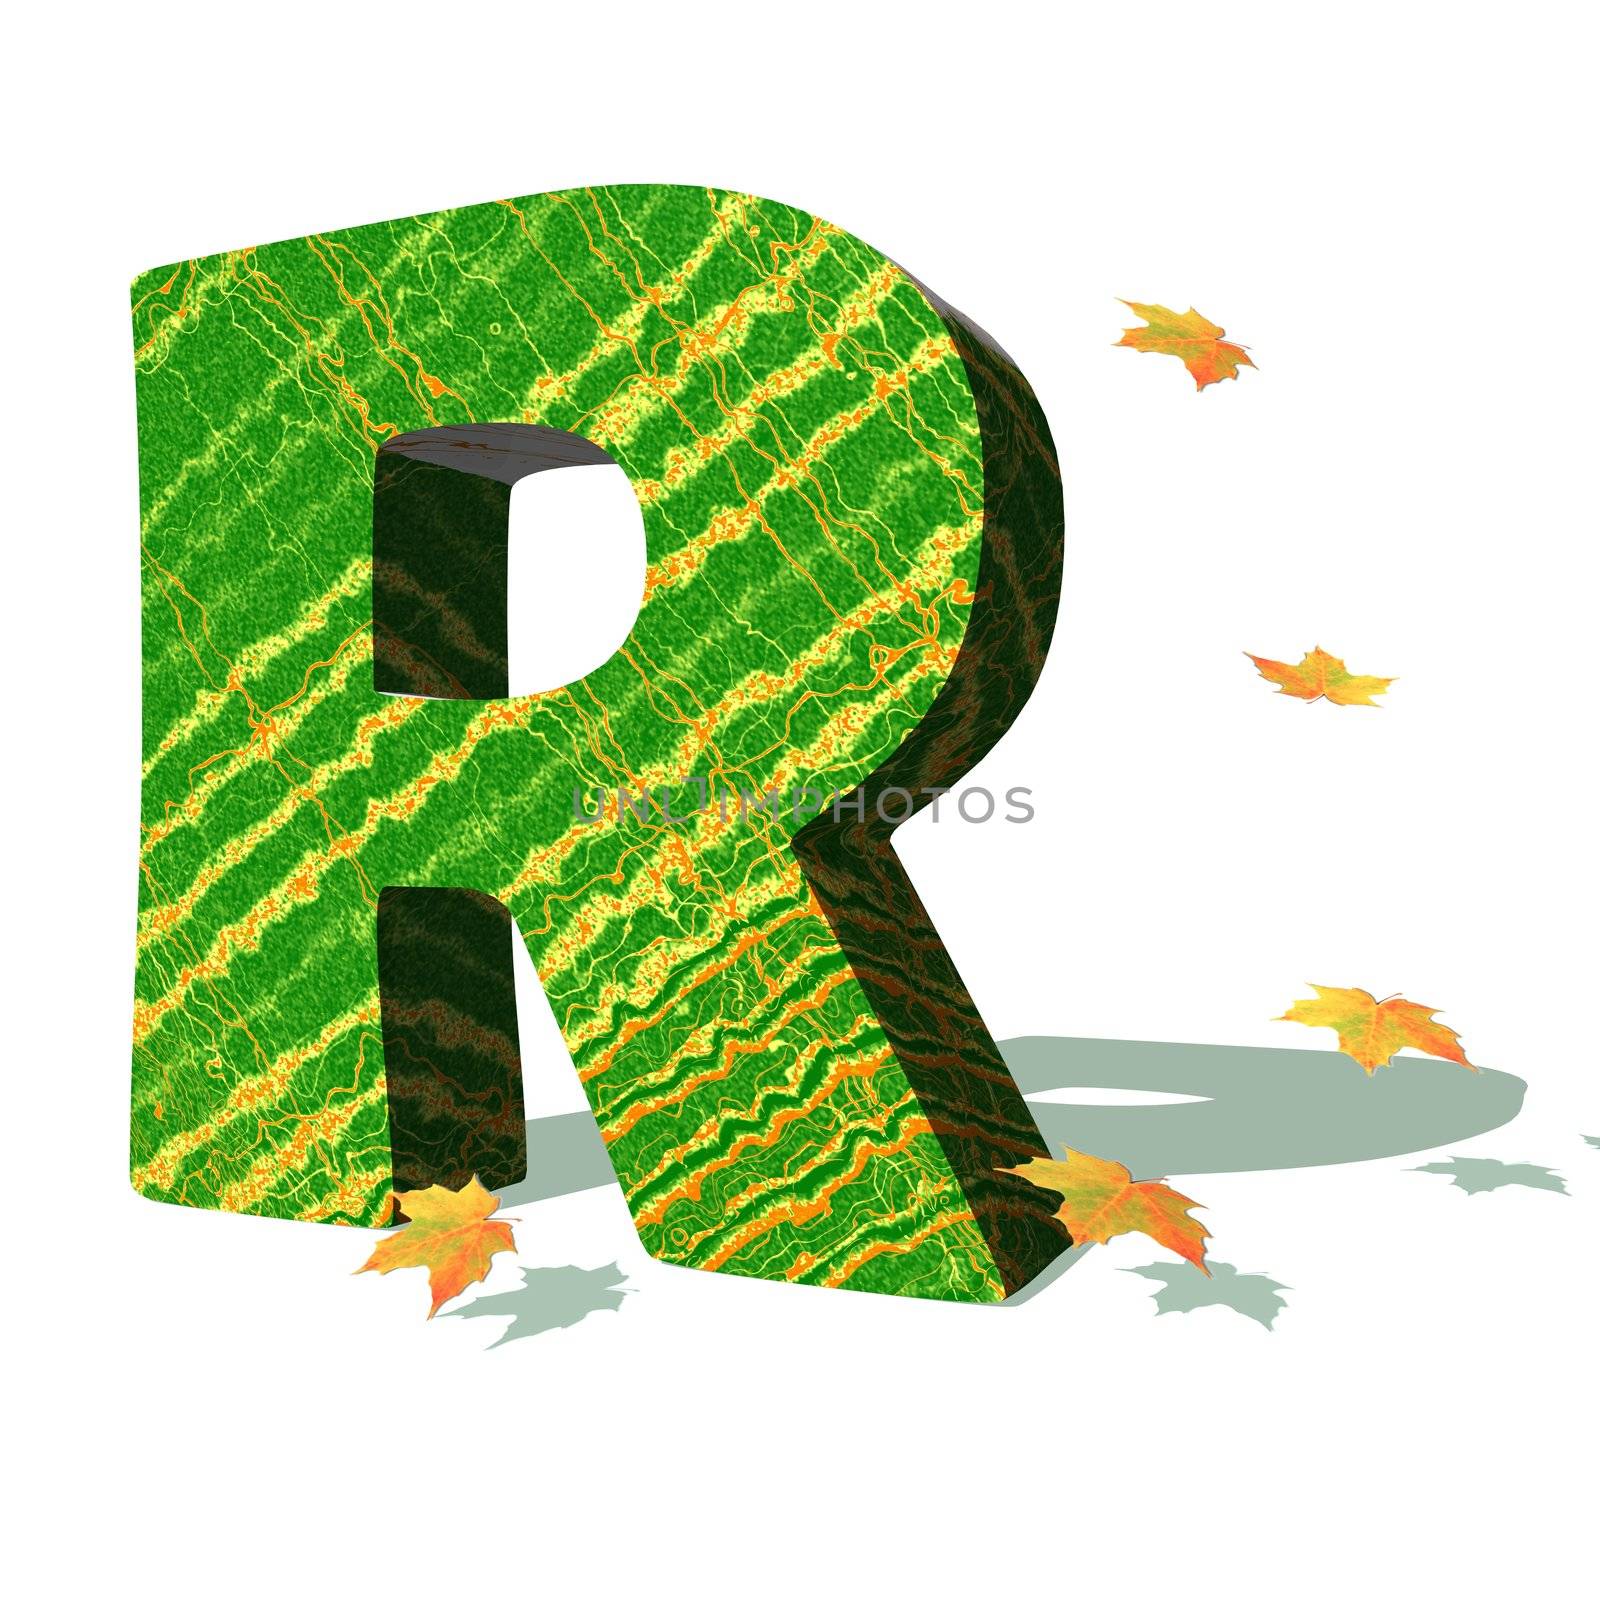 Green ecological R capital letter surrounded by few autumn falling leaves in a white background with shadows